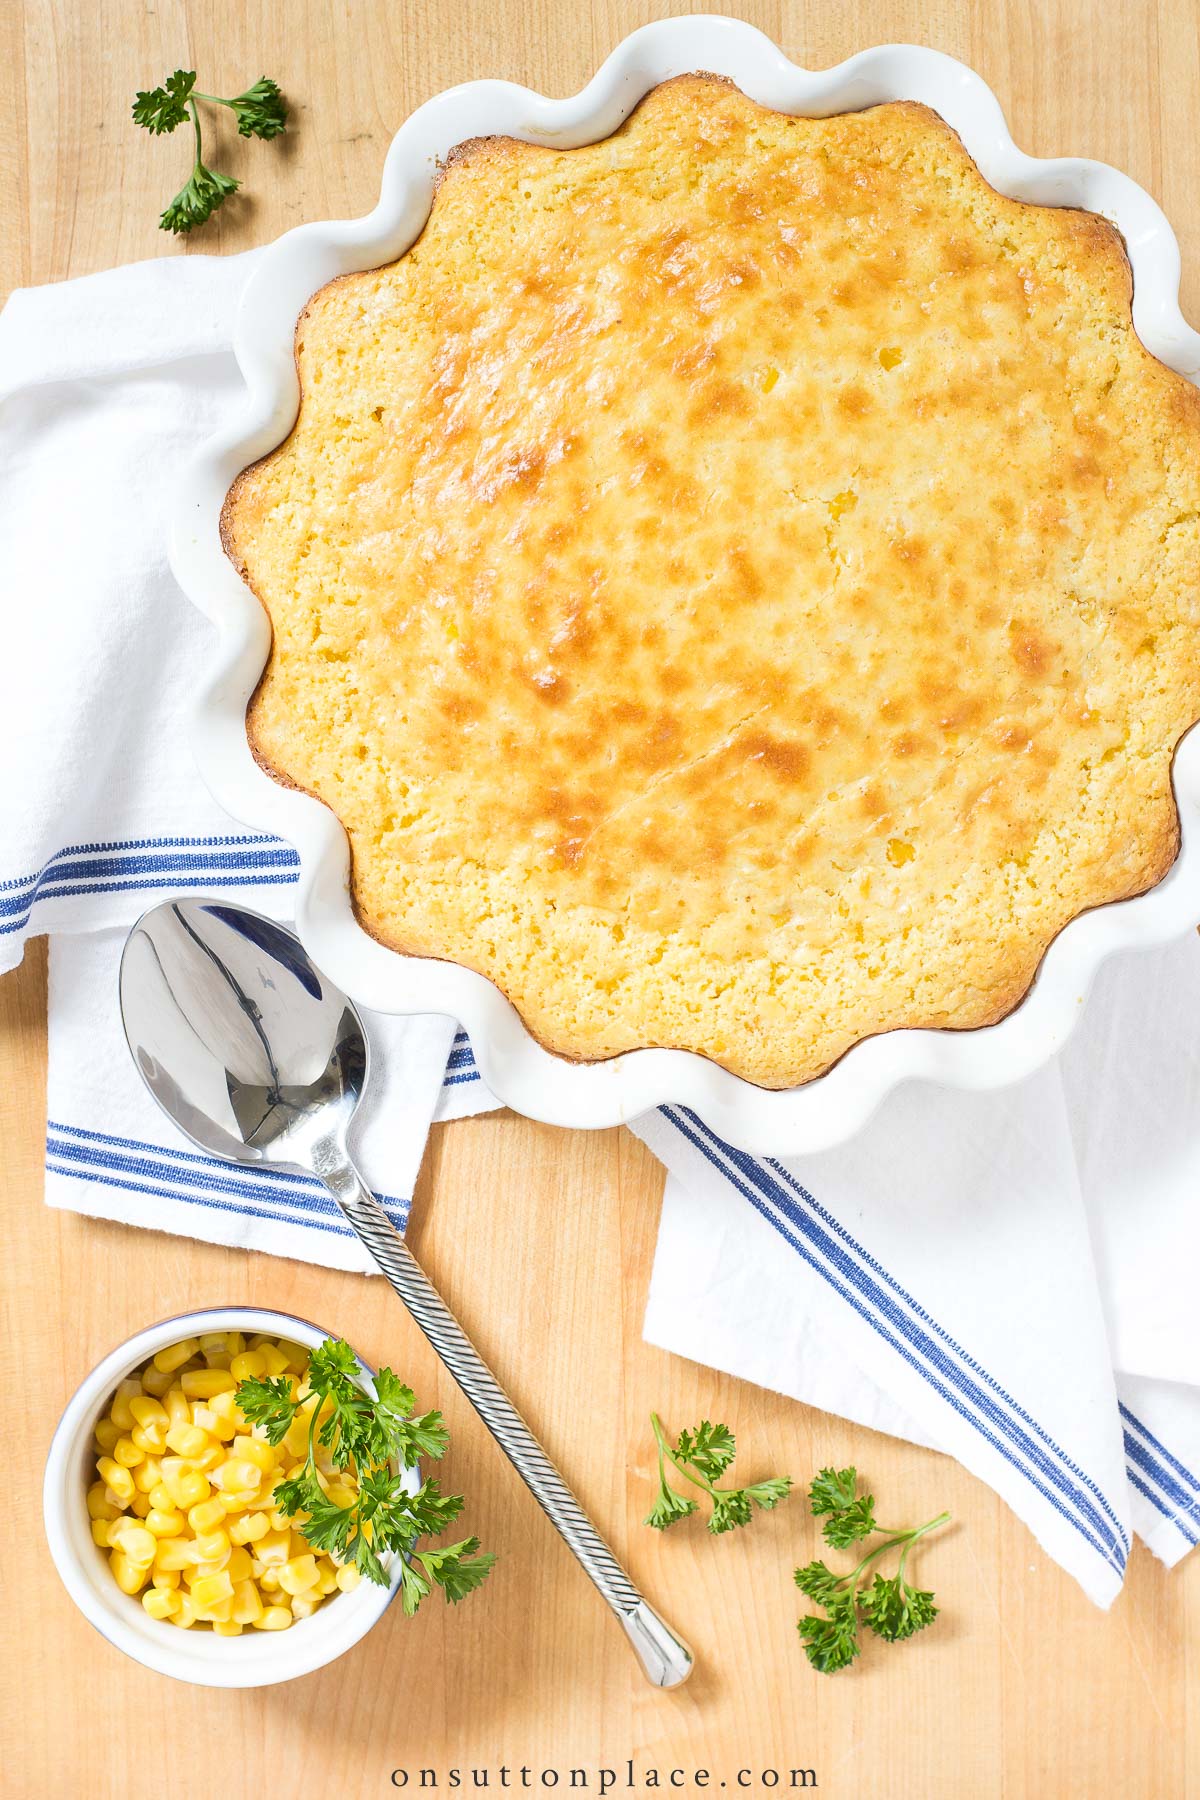 Baked Corn Casserole - An Old Family Favorite - Cook. Craft. Love.